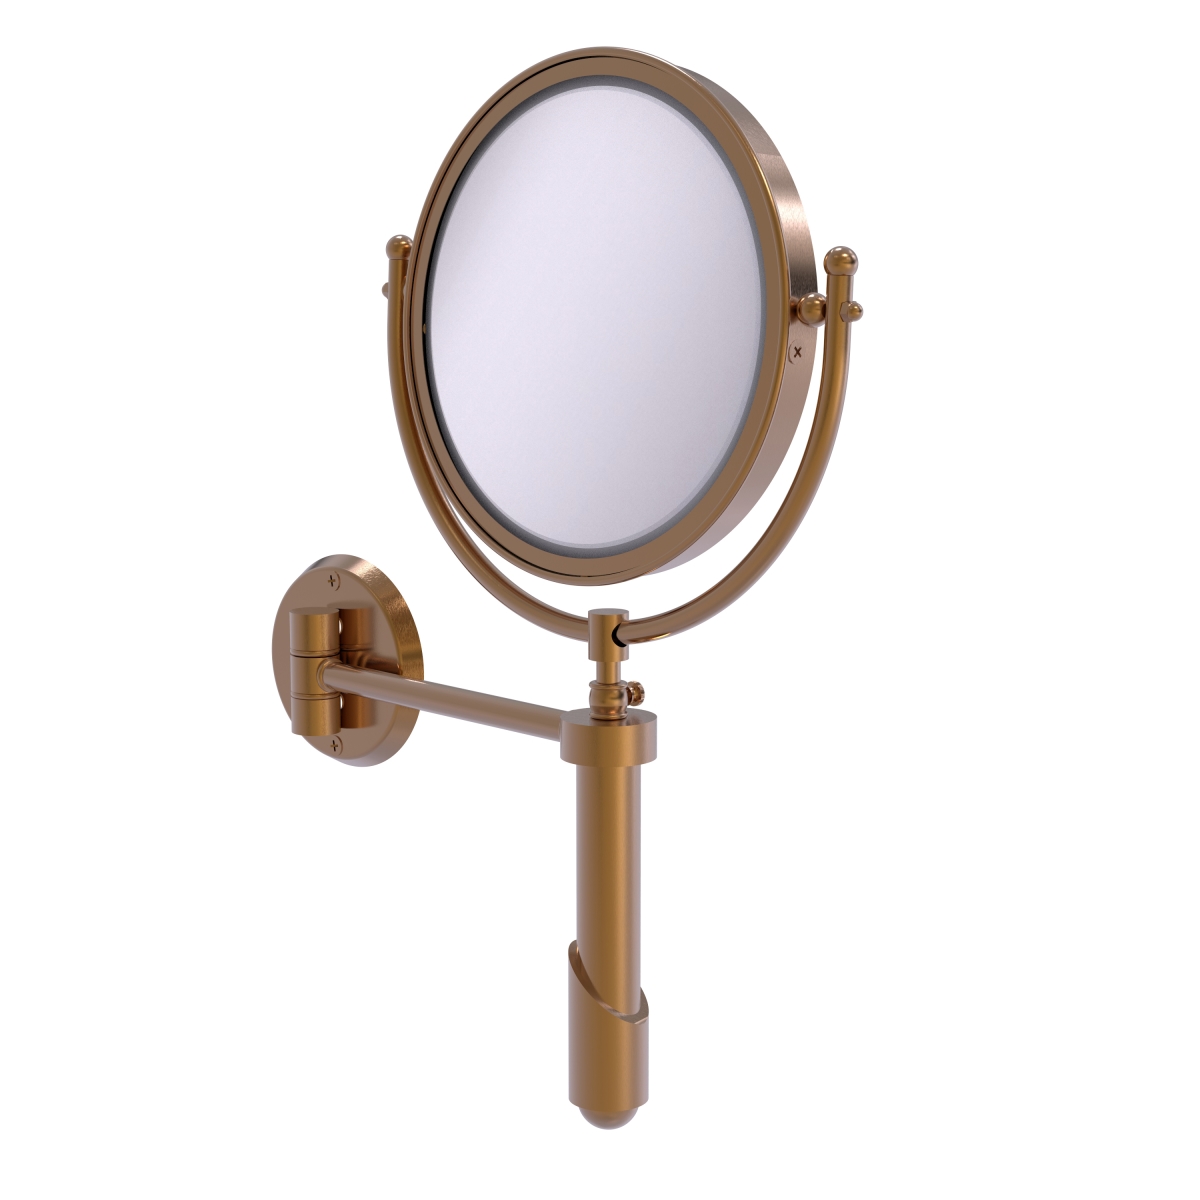 SHM-8-5X-BBR Soho Collection Wall Mounted Make-Up Mirror 8 in. dia. with 5X Magnification, Brushed Bronze -  Allied Brass, SHM-8/5X-BBR